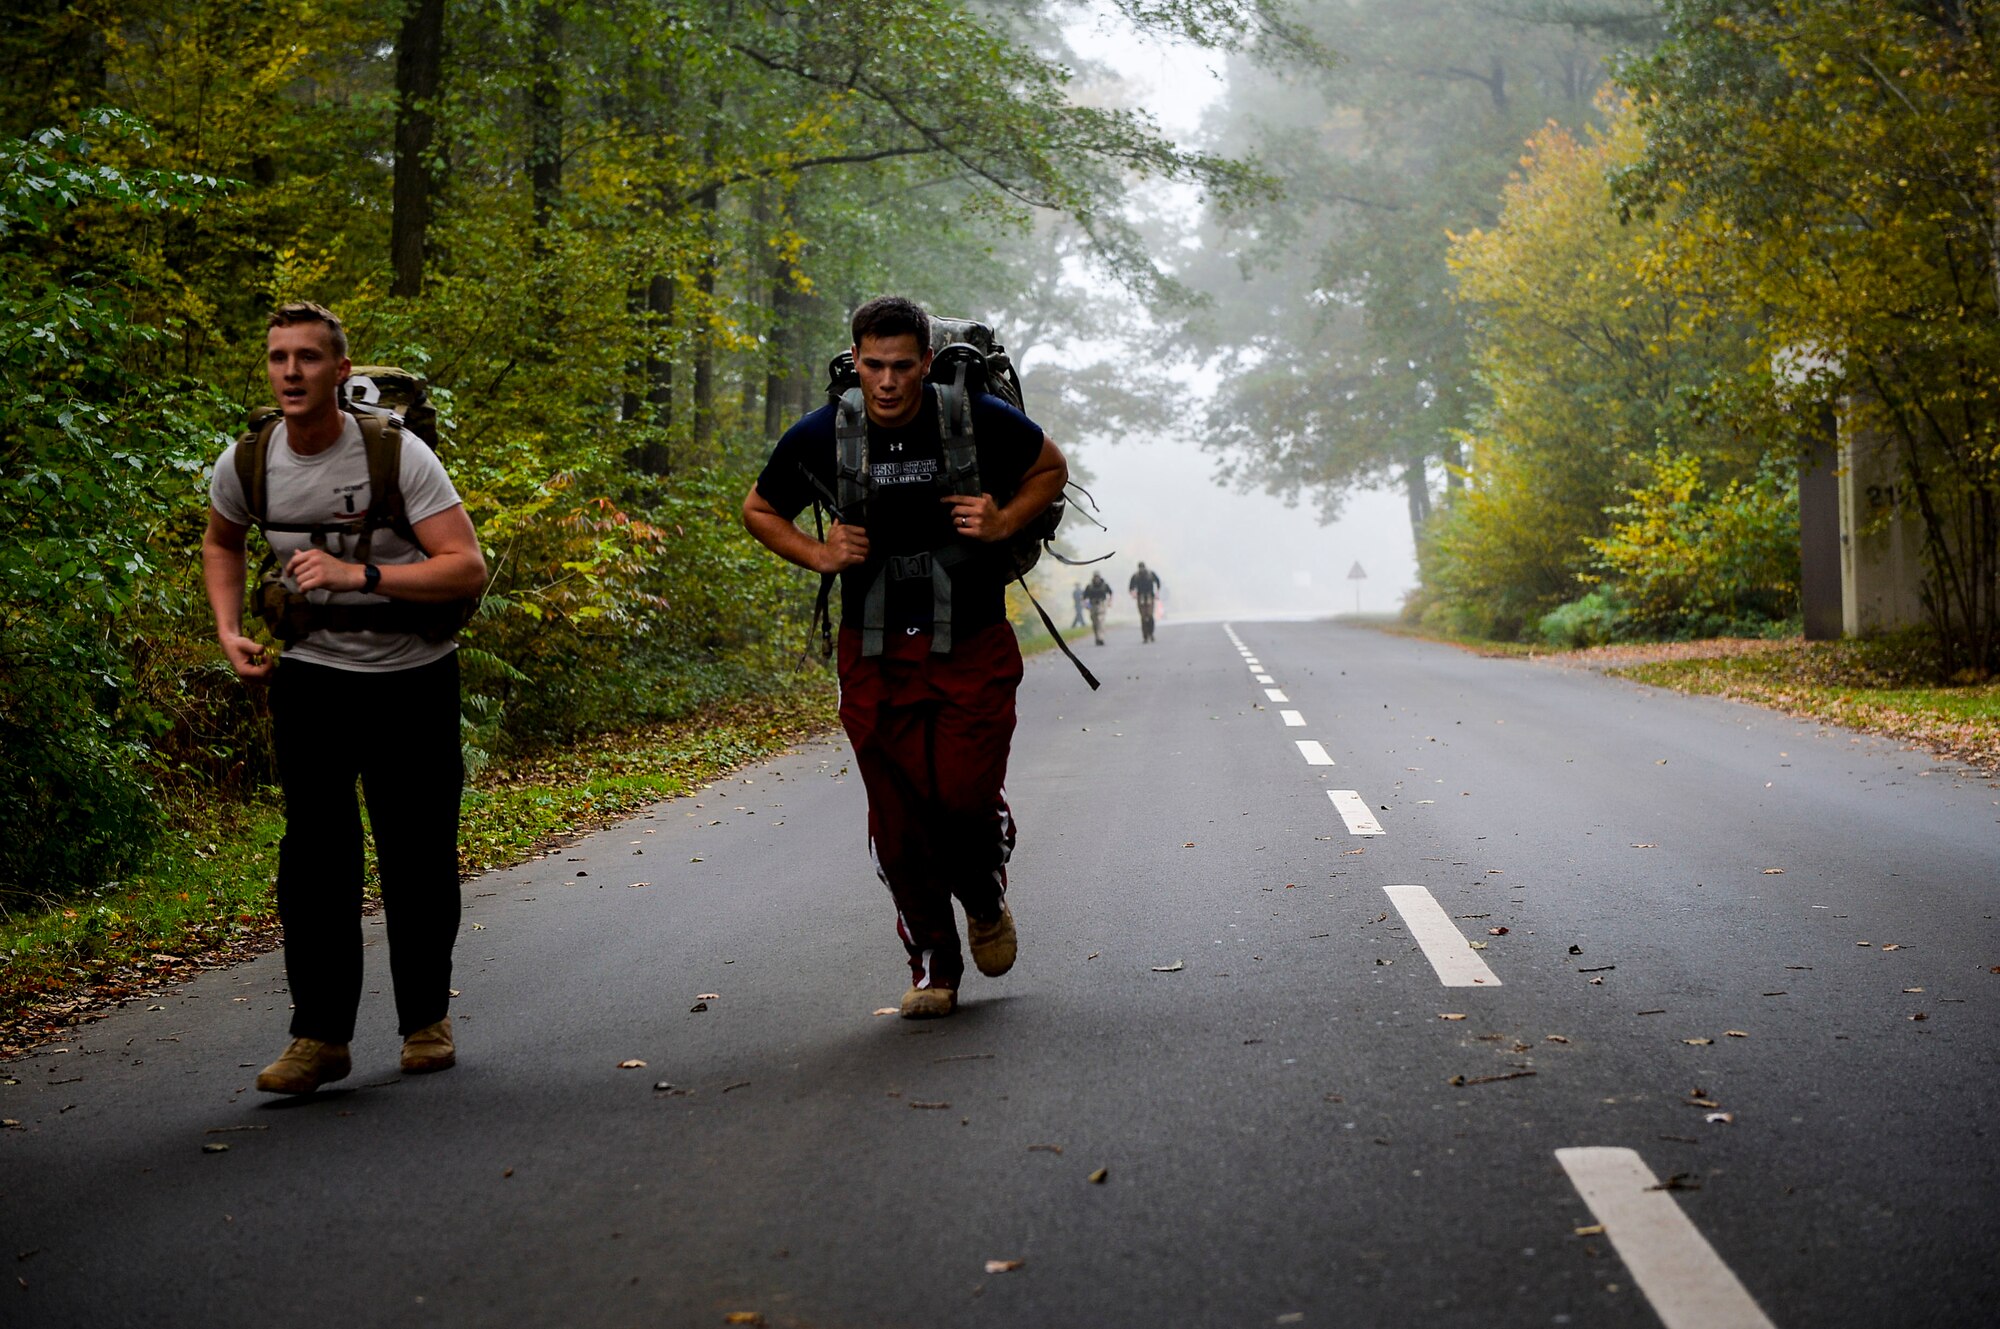 Participants in the 786th Civil Engineer Squadron’s explosive ordnance disposal ruck and run complete their final lap at Ramstein Air Base, Germany, Oct. 28, 2016. Although 786th CES’s EOD flight conducts ruck marches every month, the October ruck and run was a special Halloween-themed event designed to support the Combined Federal Campaign. (U.S. Air Force photo by Airman 1st Class Joshua Magbanua)